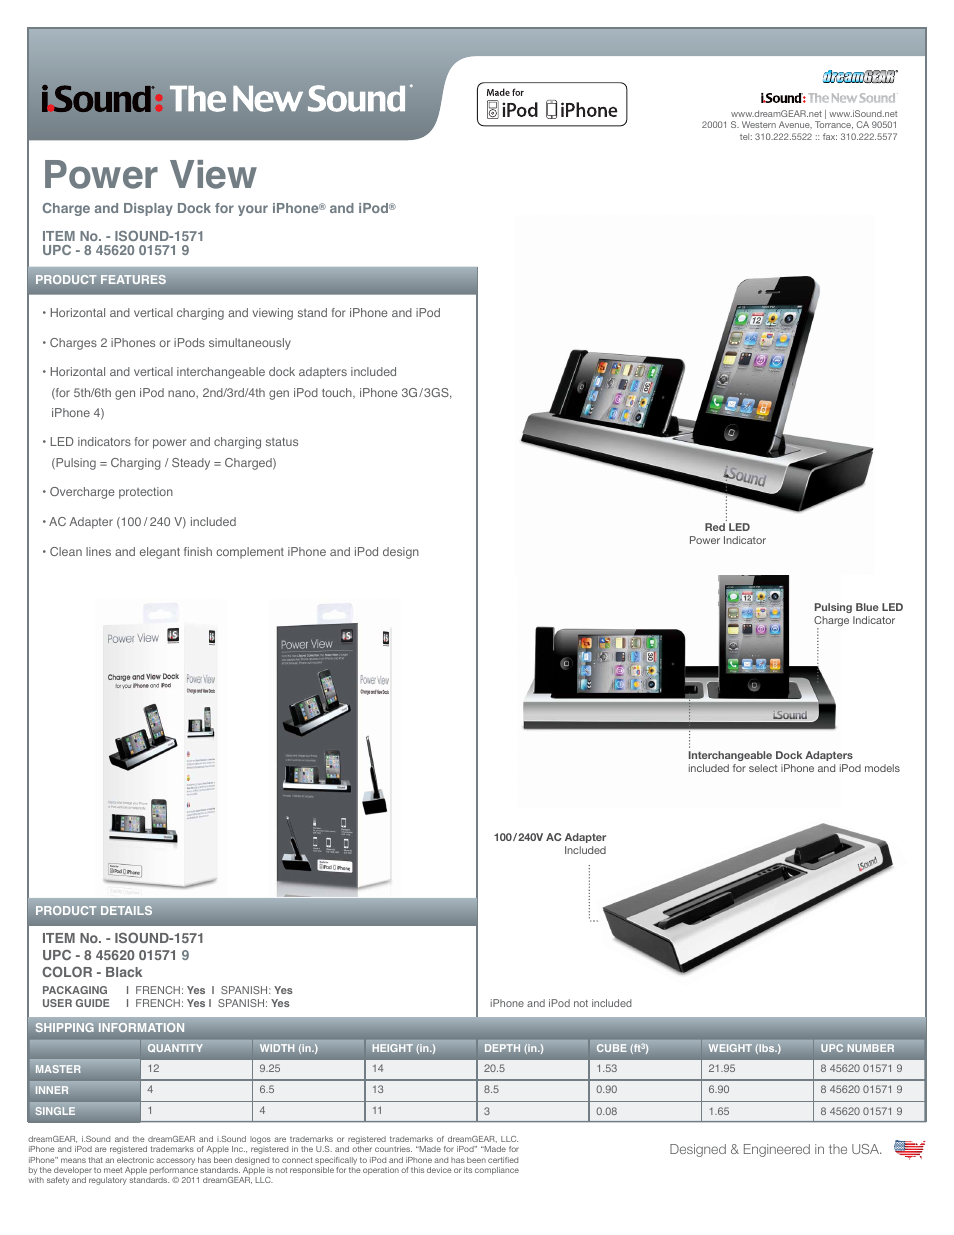 Power View - Sell Sheet